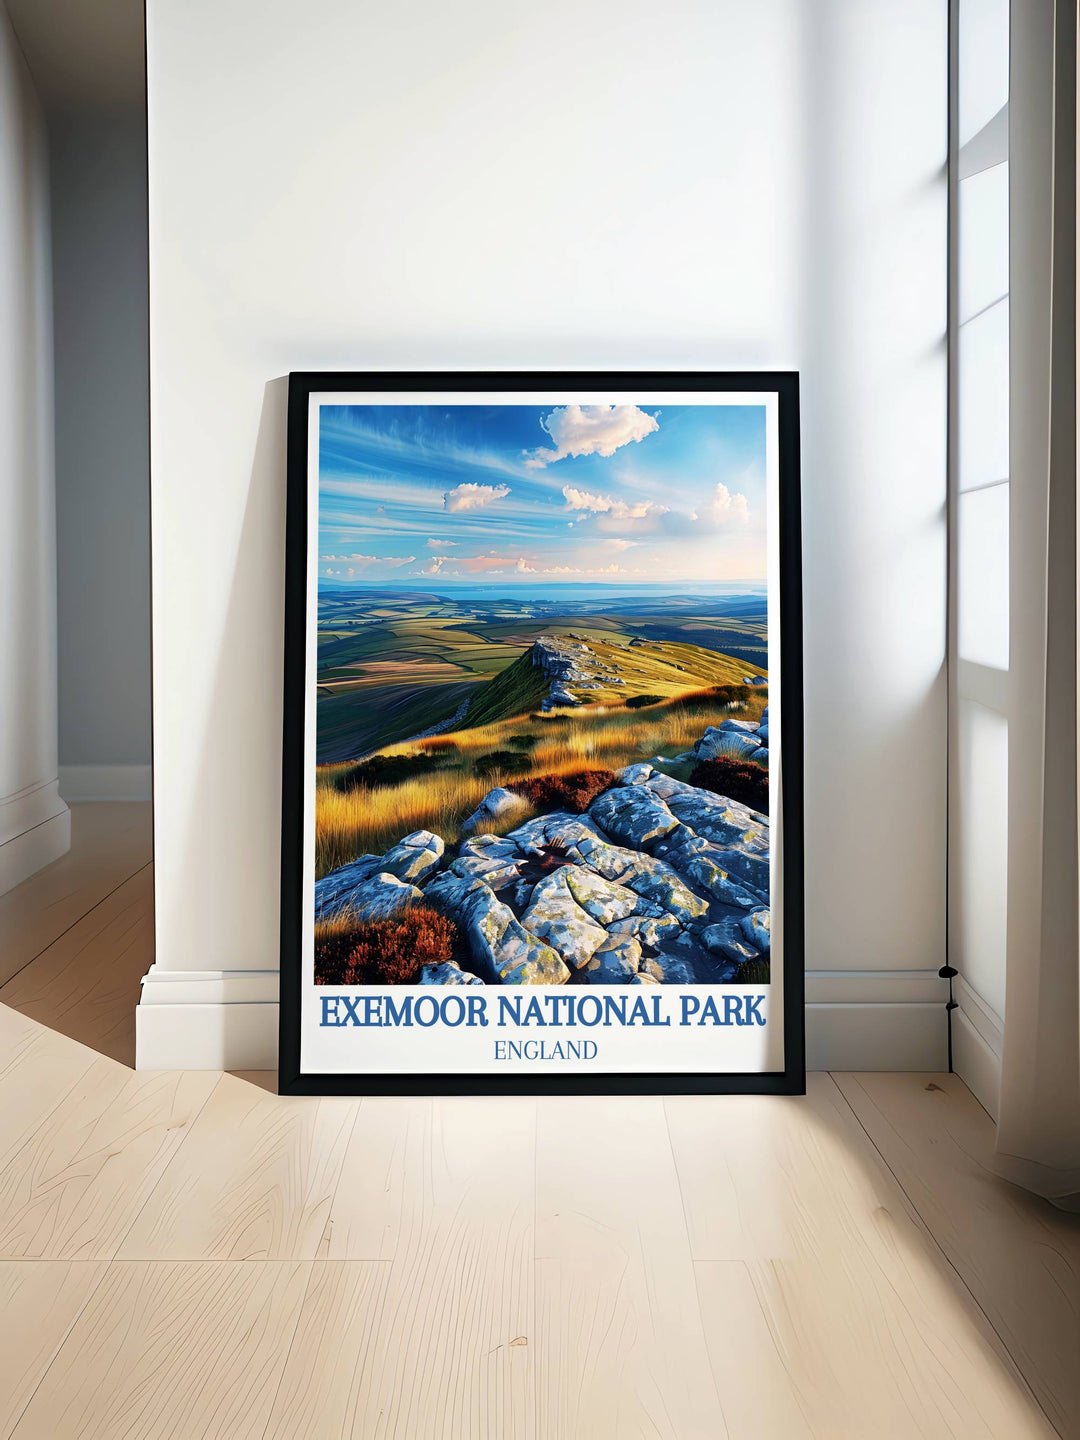  Panoramic view of Dunkery Beacon showing the sweeping landscape of Exmoor National Park under a clear sky, perfect for a serene wall art.